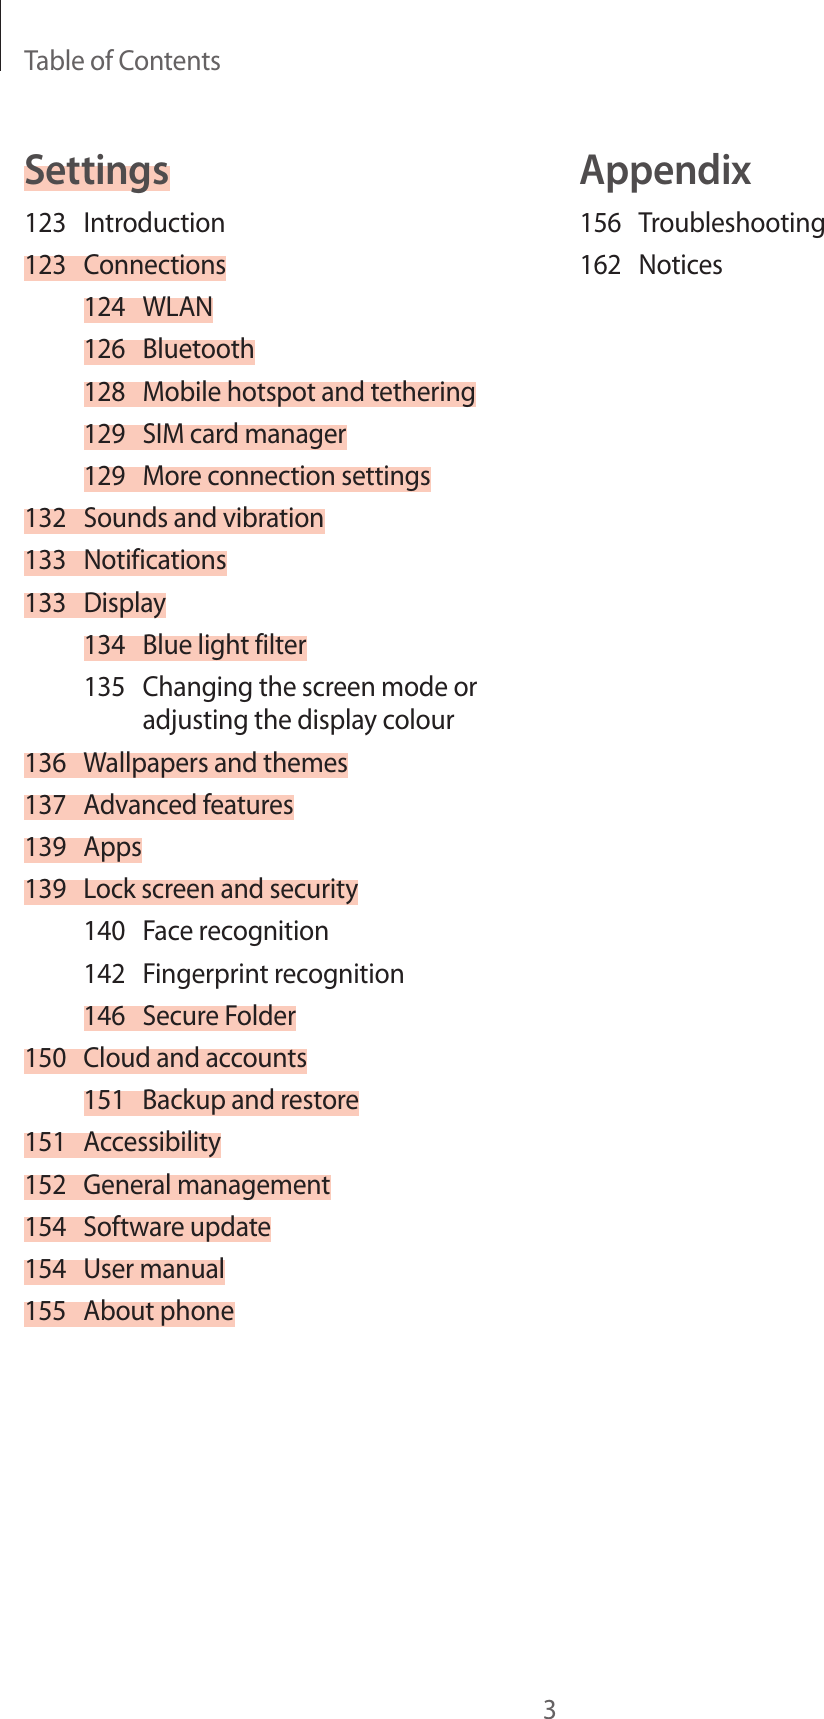 Table of Contents3Appendix156 Troubleshooting162 NoticesSettings123 Introduction123 Connections124 WLAN126 Bluetooth128  Mobile hotspot and tethering129  SIM card manager129  More connection settings132  Sounds and vibration133 Notifications133 Display134  Blue light filter135  Changing the screen mode or adjusting the display colour136  Wallpapers and themes137  Advanced features139 Apps139  Lock screen and security140  Face recognition142  Fingerprint recognition146  Secure Folder150  Cloud and accounts151  Backup and restore151 Accessibility152  General management154  Software update154  User manual155  About phone